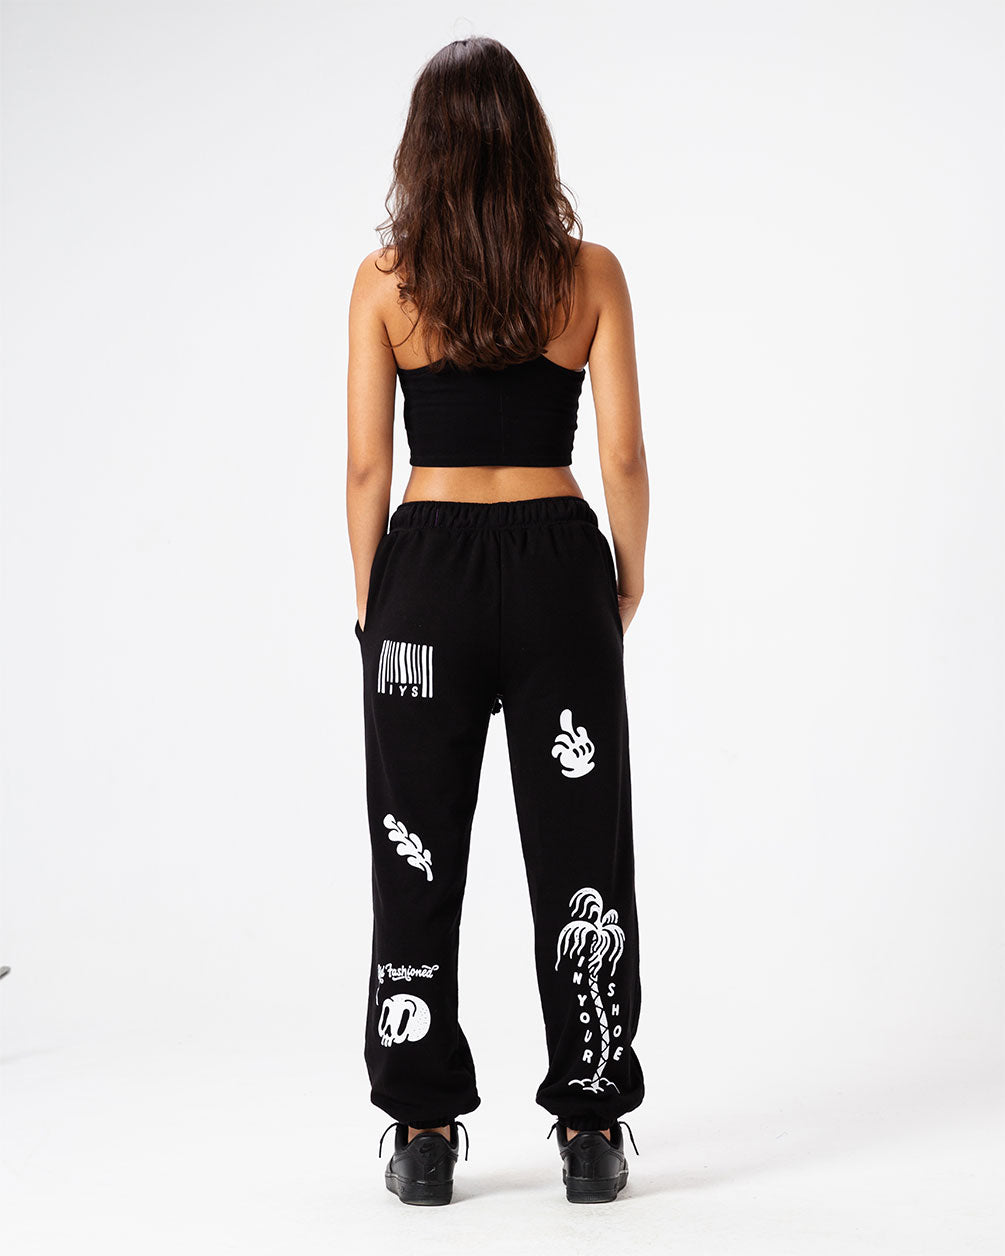 Black Printed Swants (Sweatpants) Swants IN YOUR SHOE M 